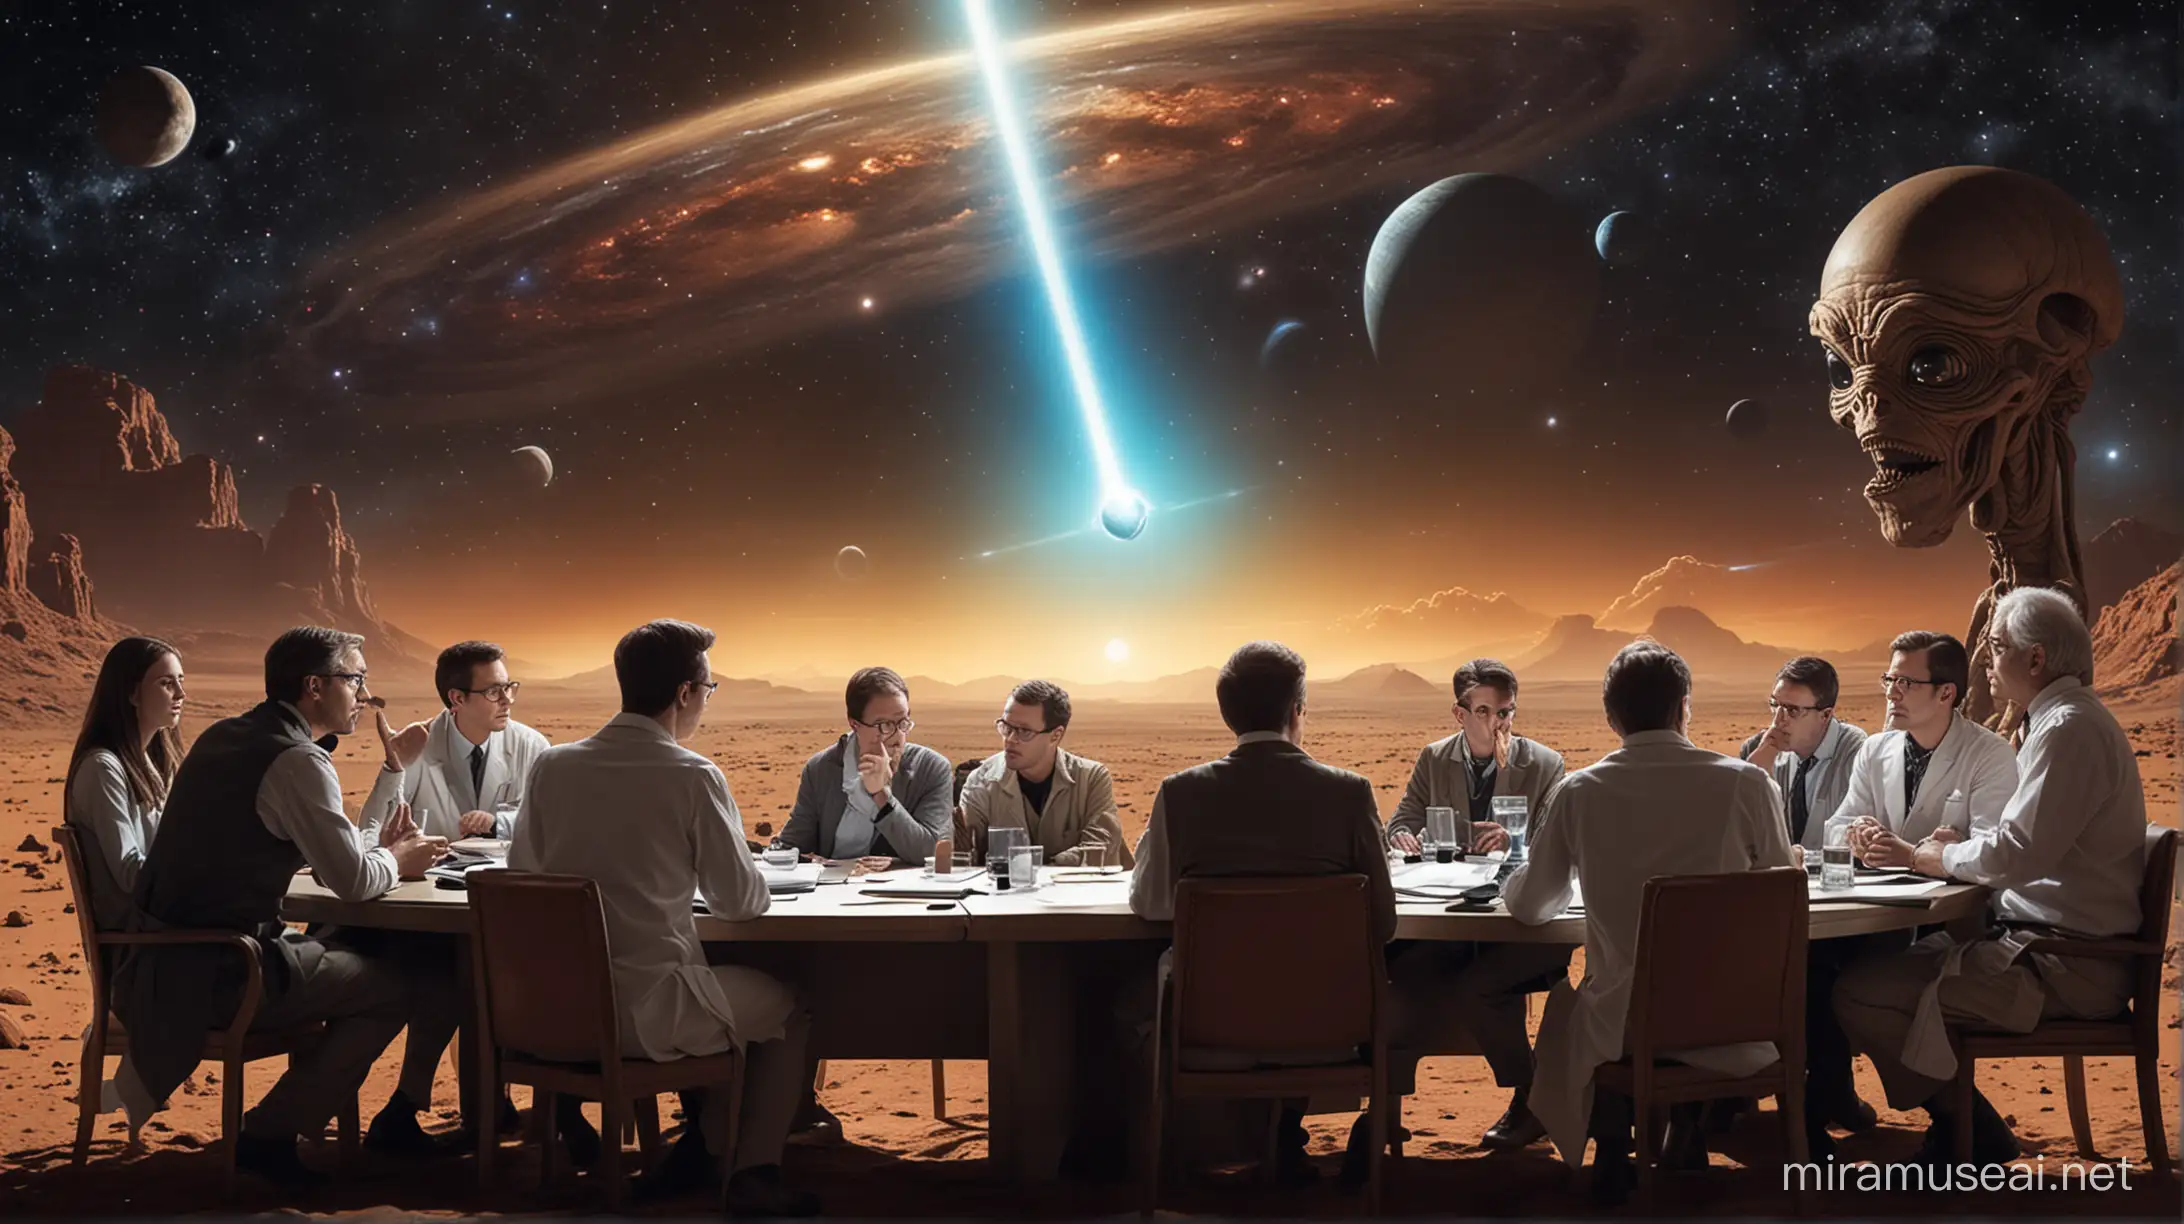 Illustrate a group of scientists engaged in a heated debate, with some passionately advocating for the theory that the signal originated from an alien civilization attempting to make contact. Show contrasting expressions among the scientists, ranging from skepticism to intrigue, as they discuss the implications of this extraordinary possibility. Let the image convey the tension and excitement in the air as they grapple with the profound implications of the extraterrestrial hypothesis.